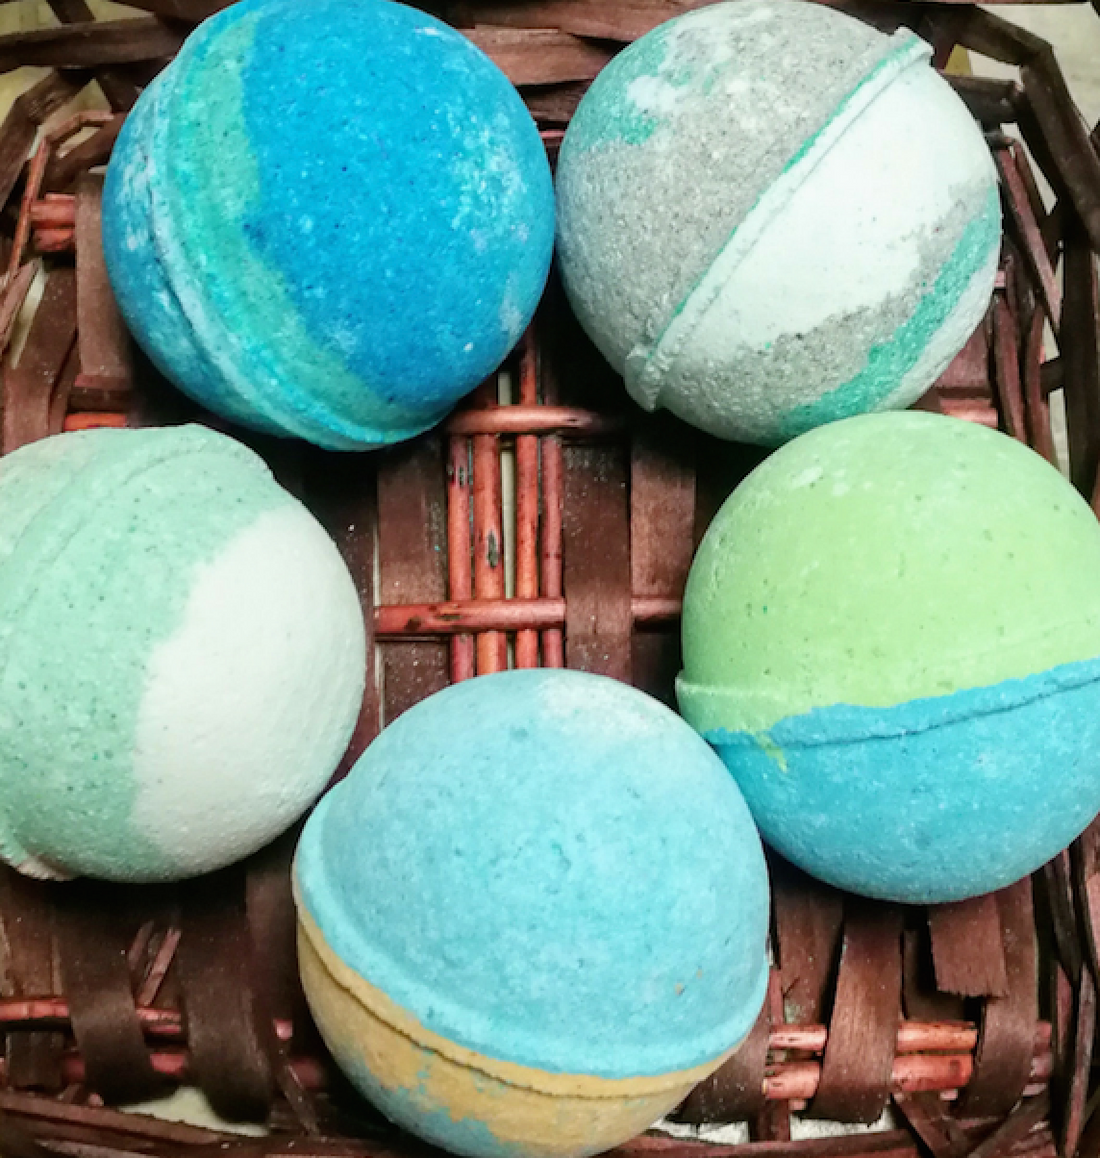 All Natural Bath Bombs With a Surprise #bubblybelle